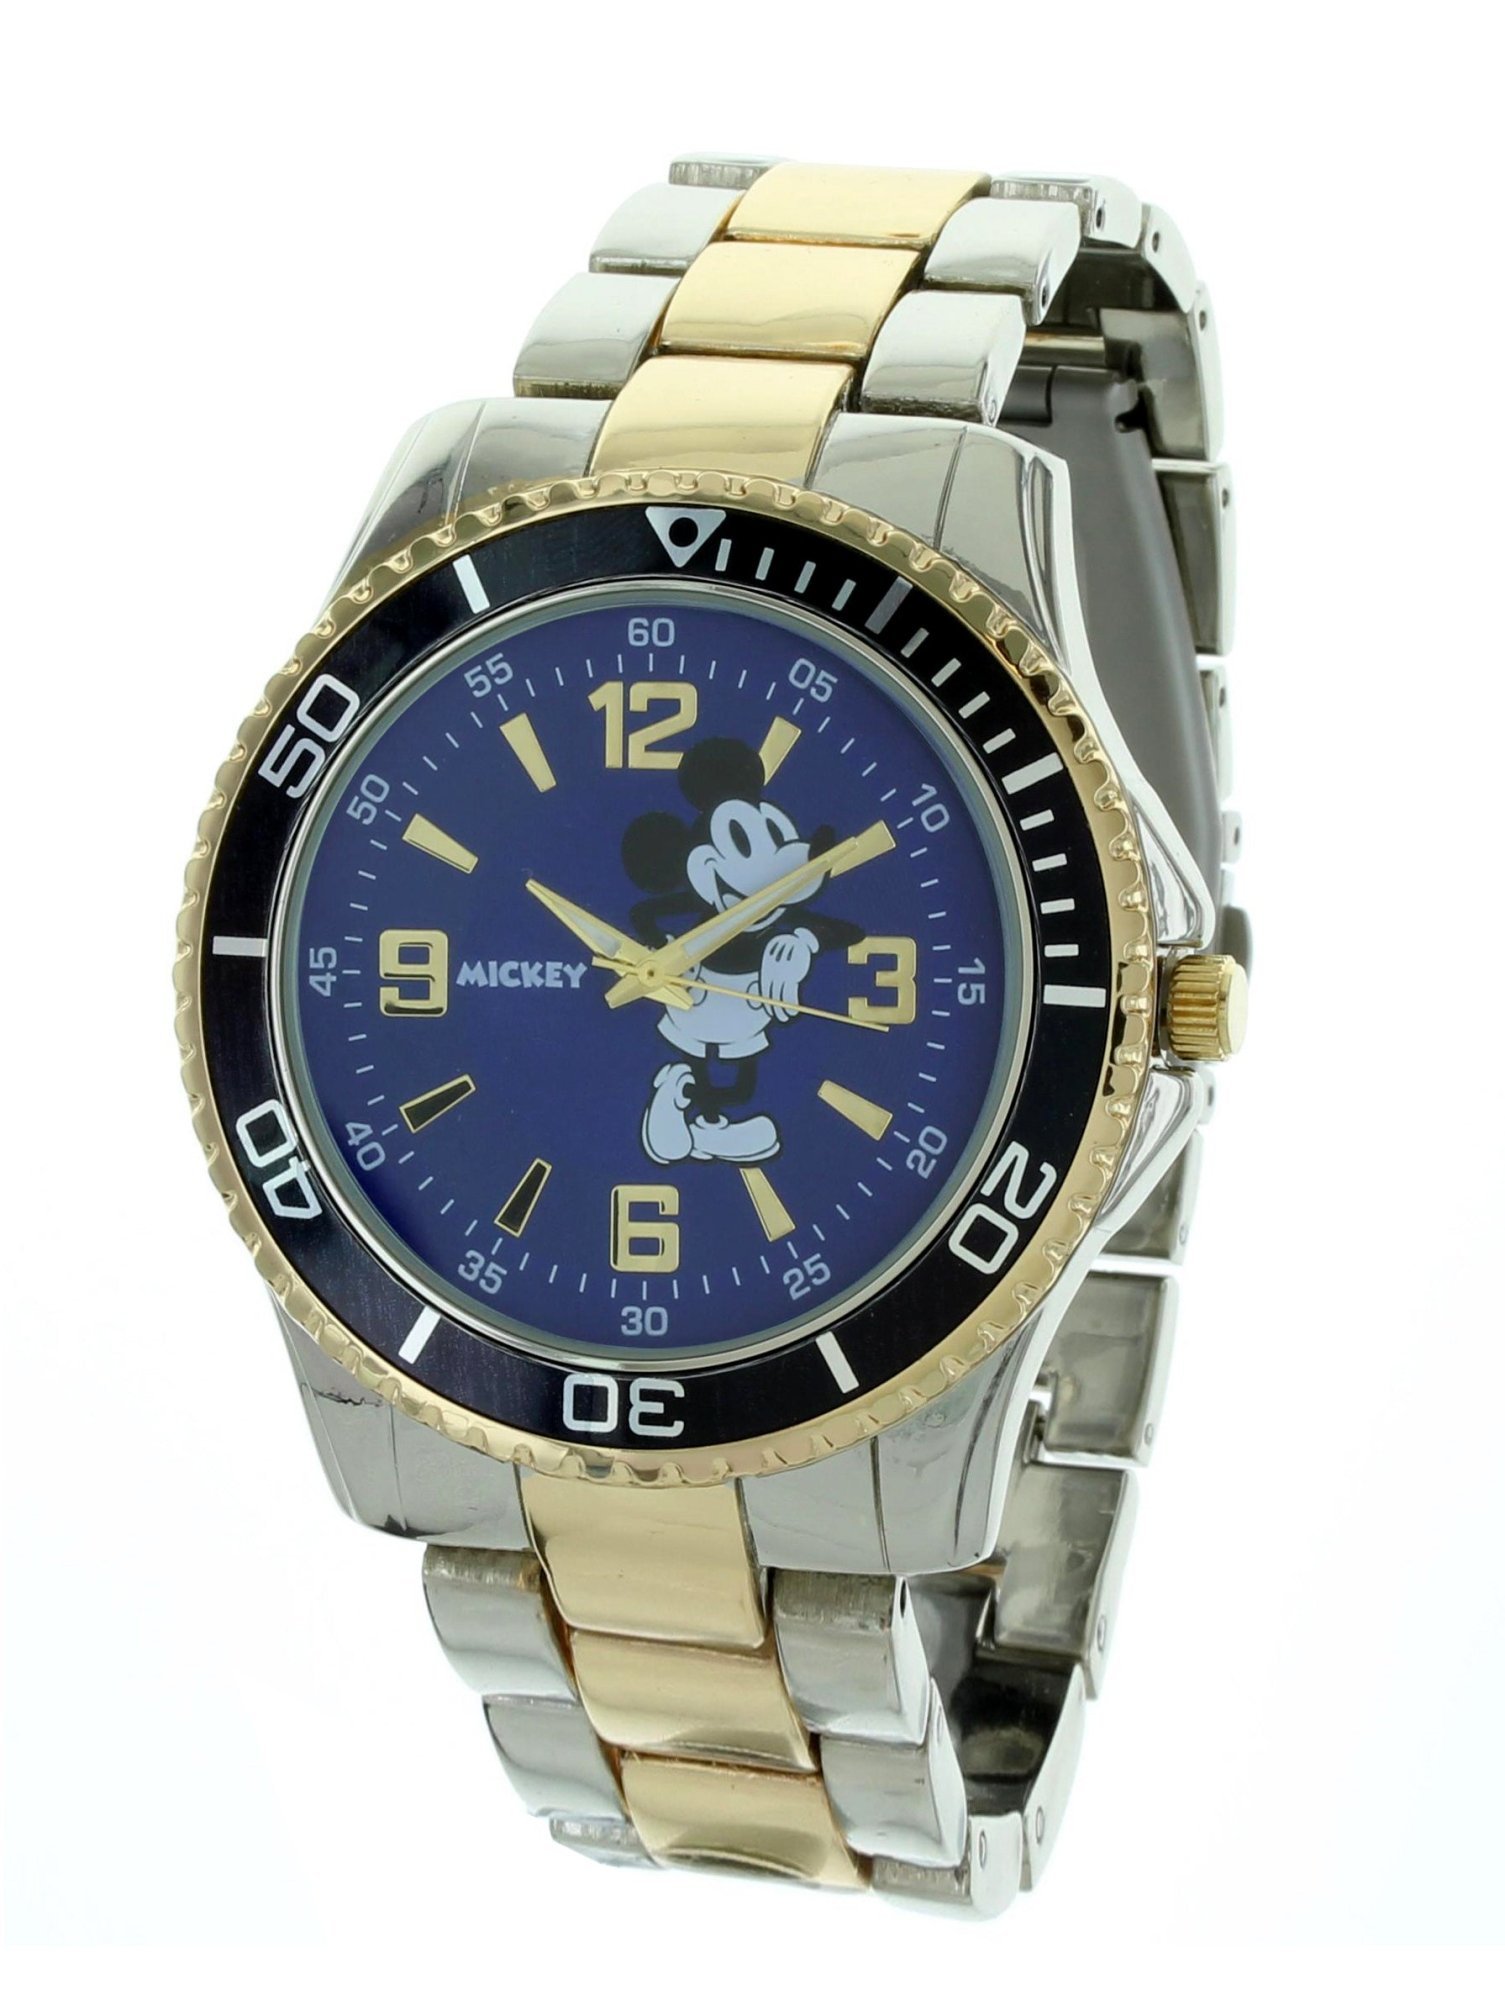 Model: Men's Mickey Mouse Watch with Two Tone Metal Case and Strap with Black Bezel and Blue Dial